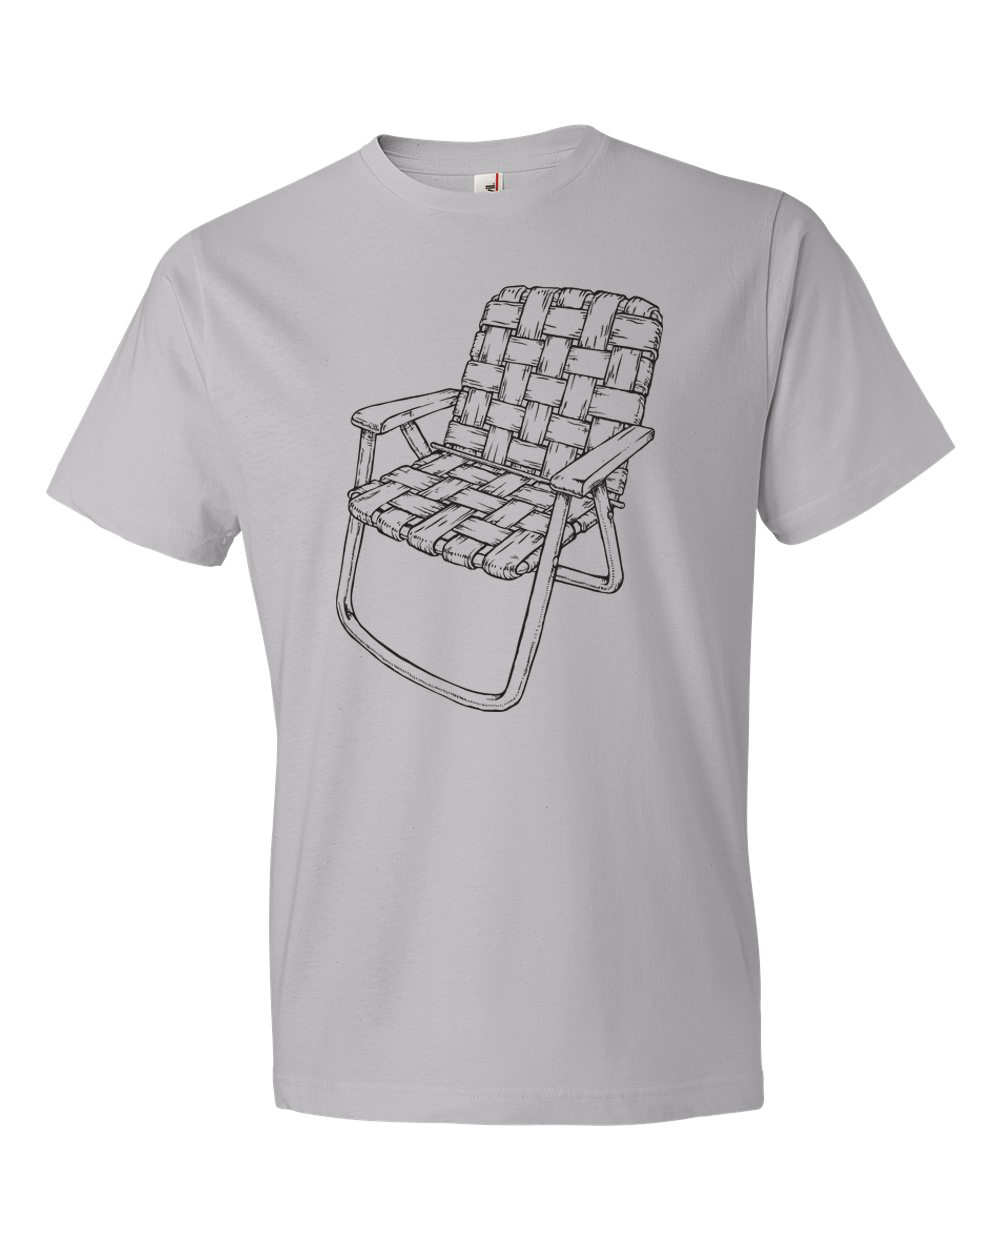 Lawn Chair T-Shirt - Black outline on Light Gray